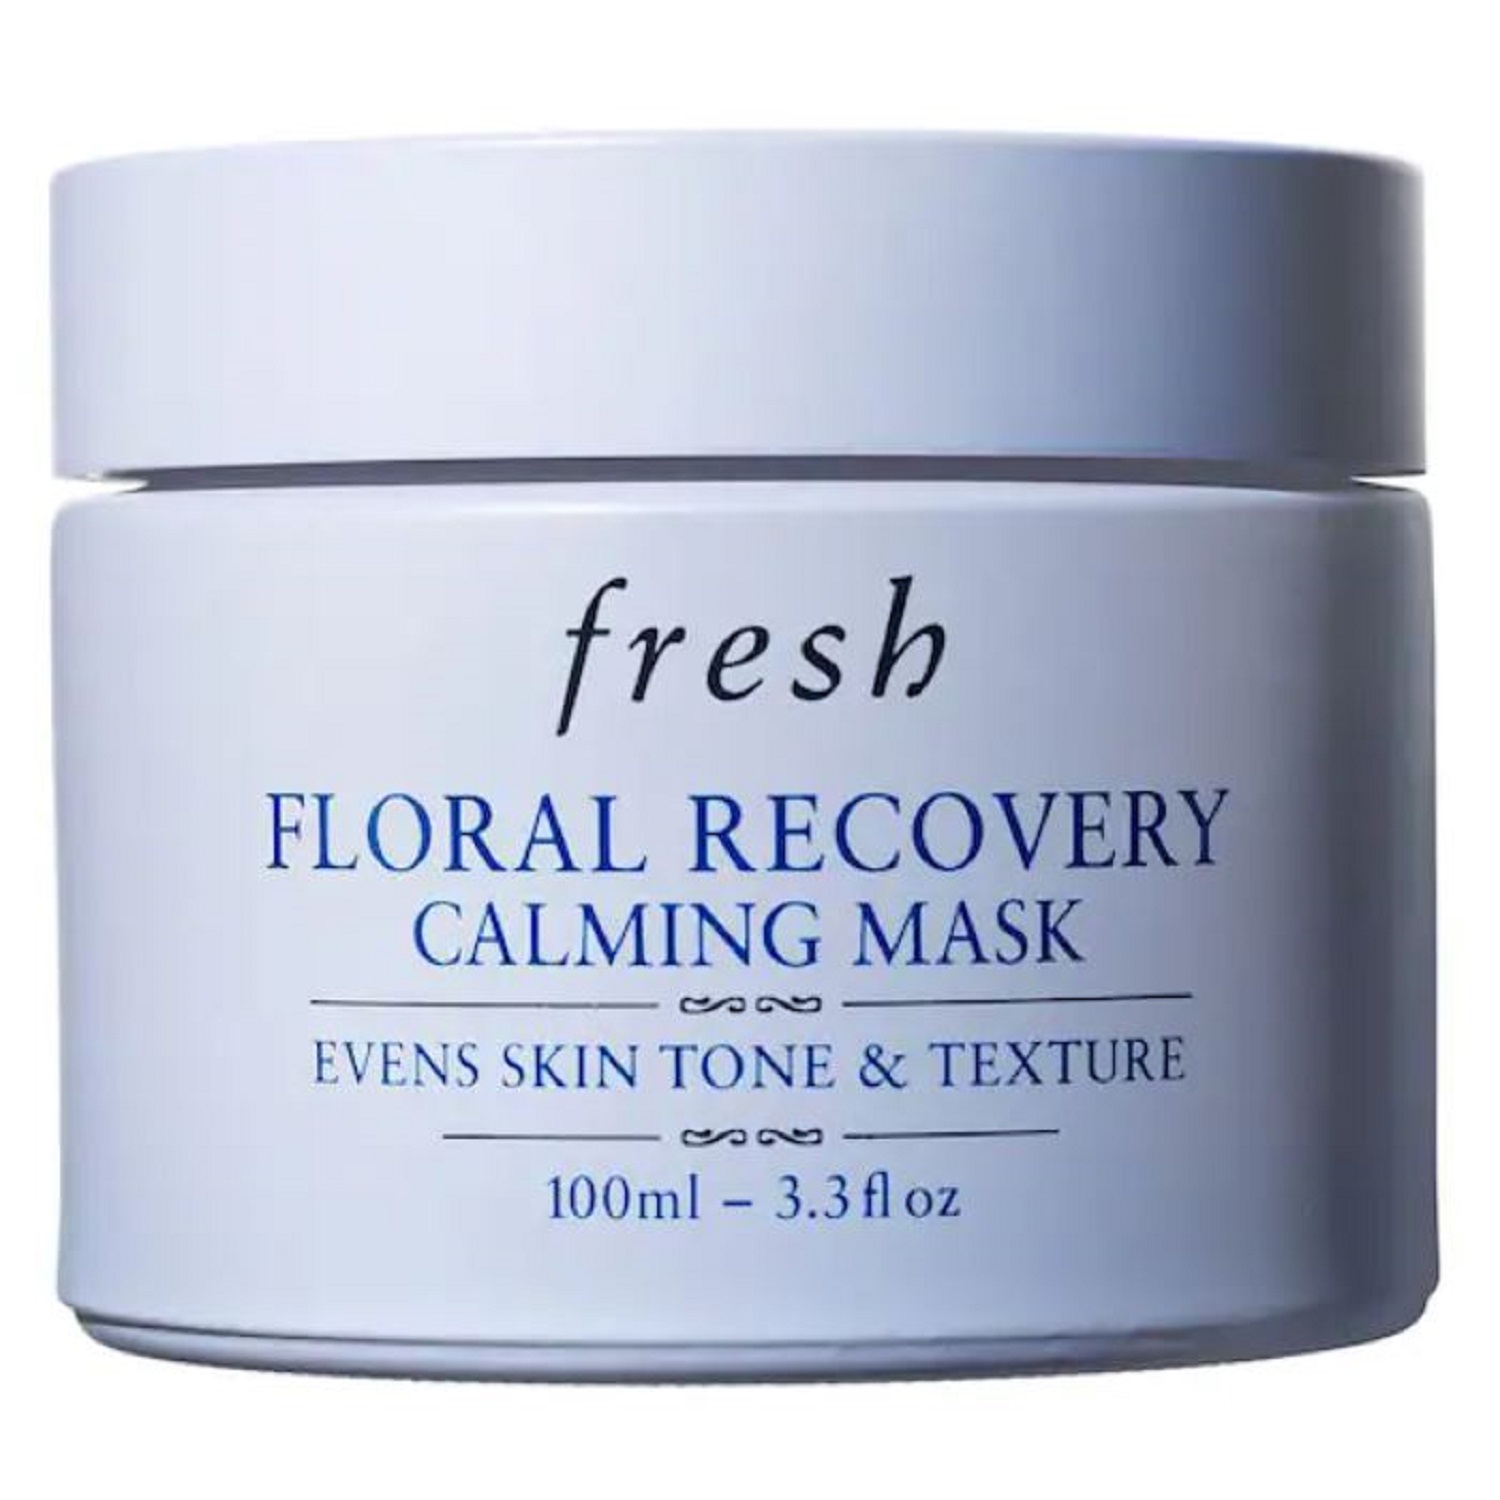 FLORAL RECOVERY REDNESS REDUCING OVERNIGHT MASK (MASCARILLA FACIAL)